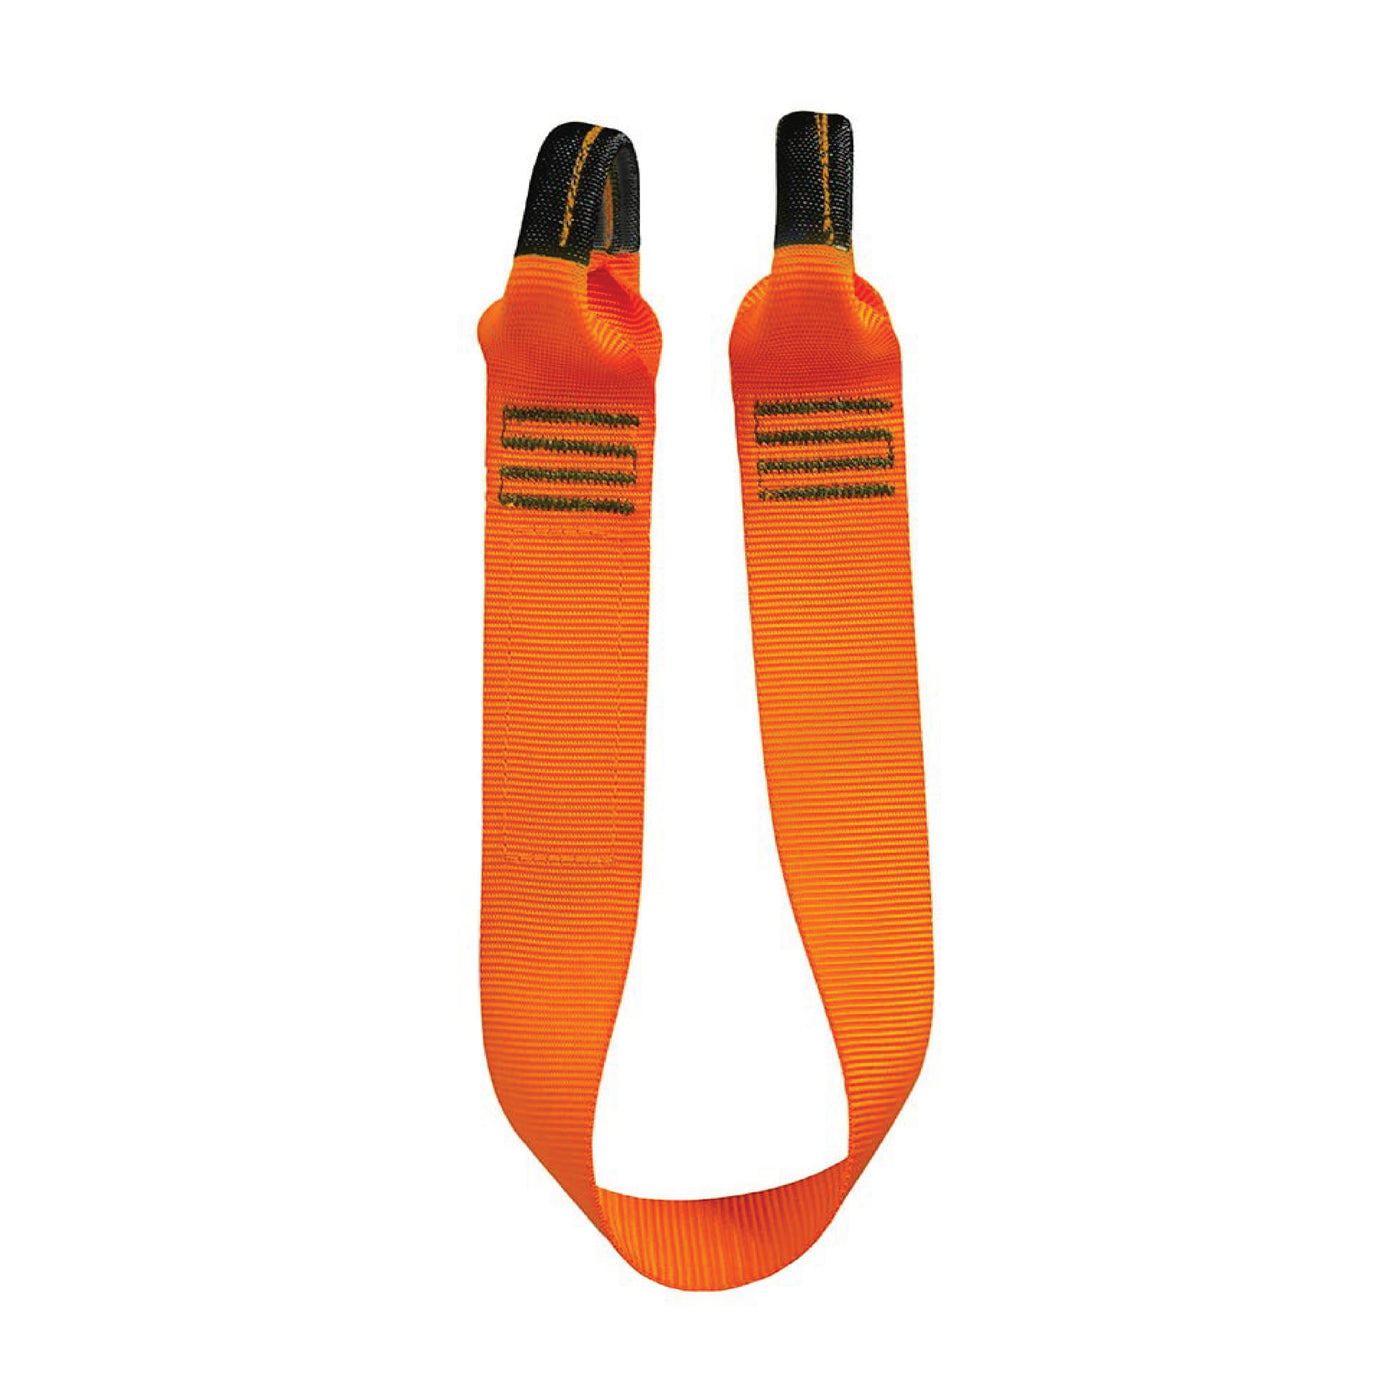 Lanyard with Two Gear Loops – Breaking Strength of 5000 lb.